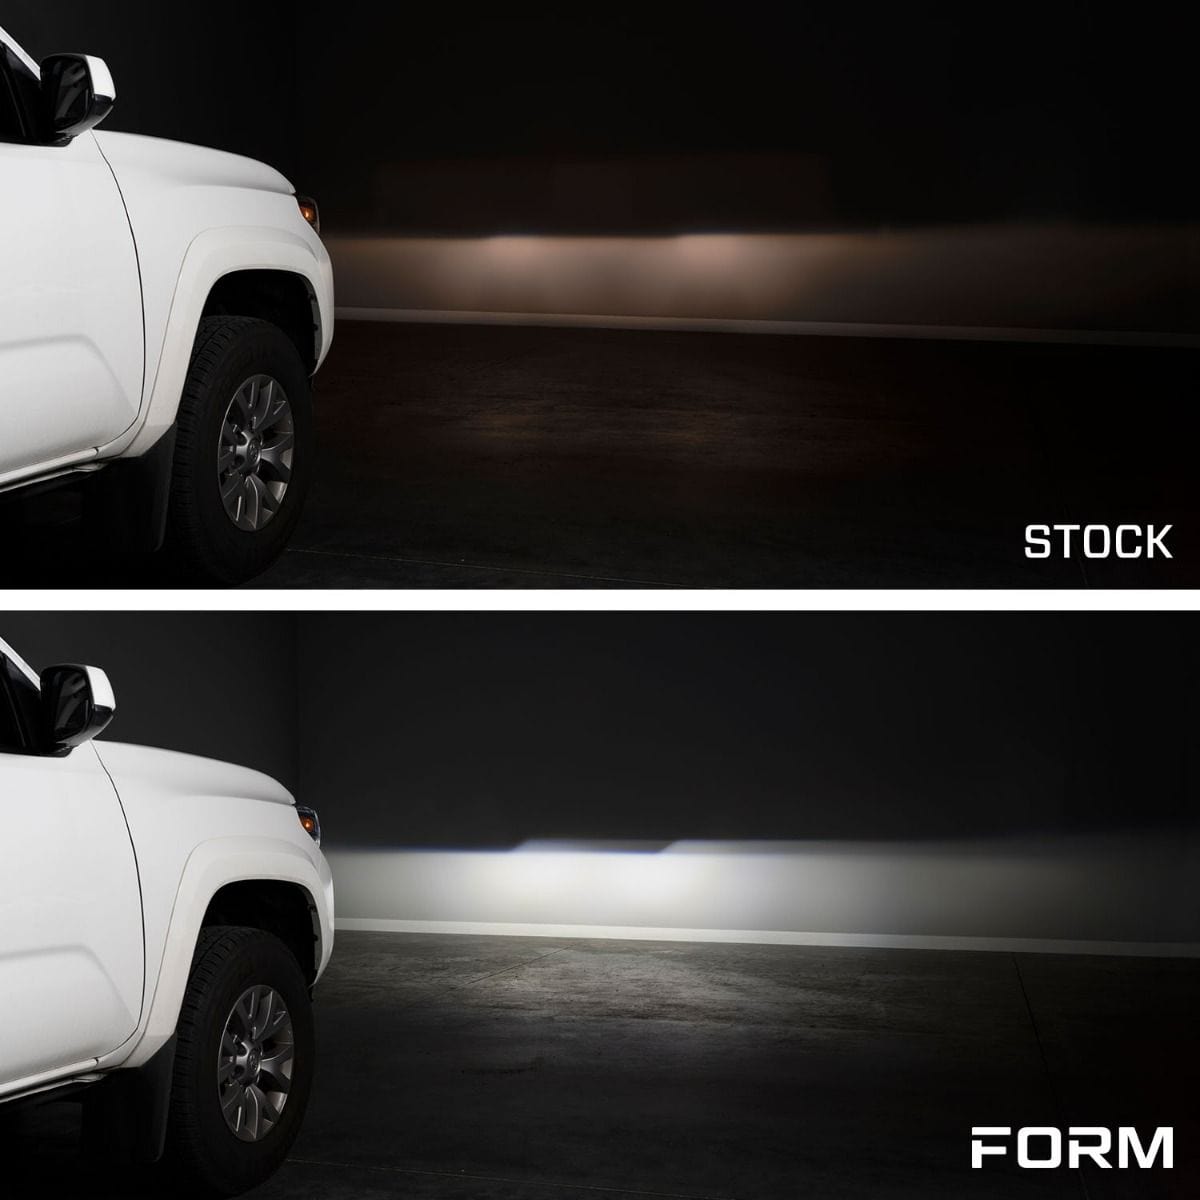 TacomaForce 2016-2023 TOYOTA TACOMA SEQUENTIAL LED PROJECTOR HEADLIGHTS WITH WHITE DRL (PAIR)